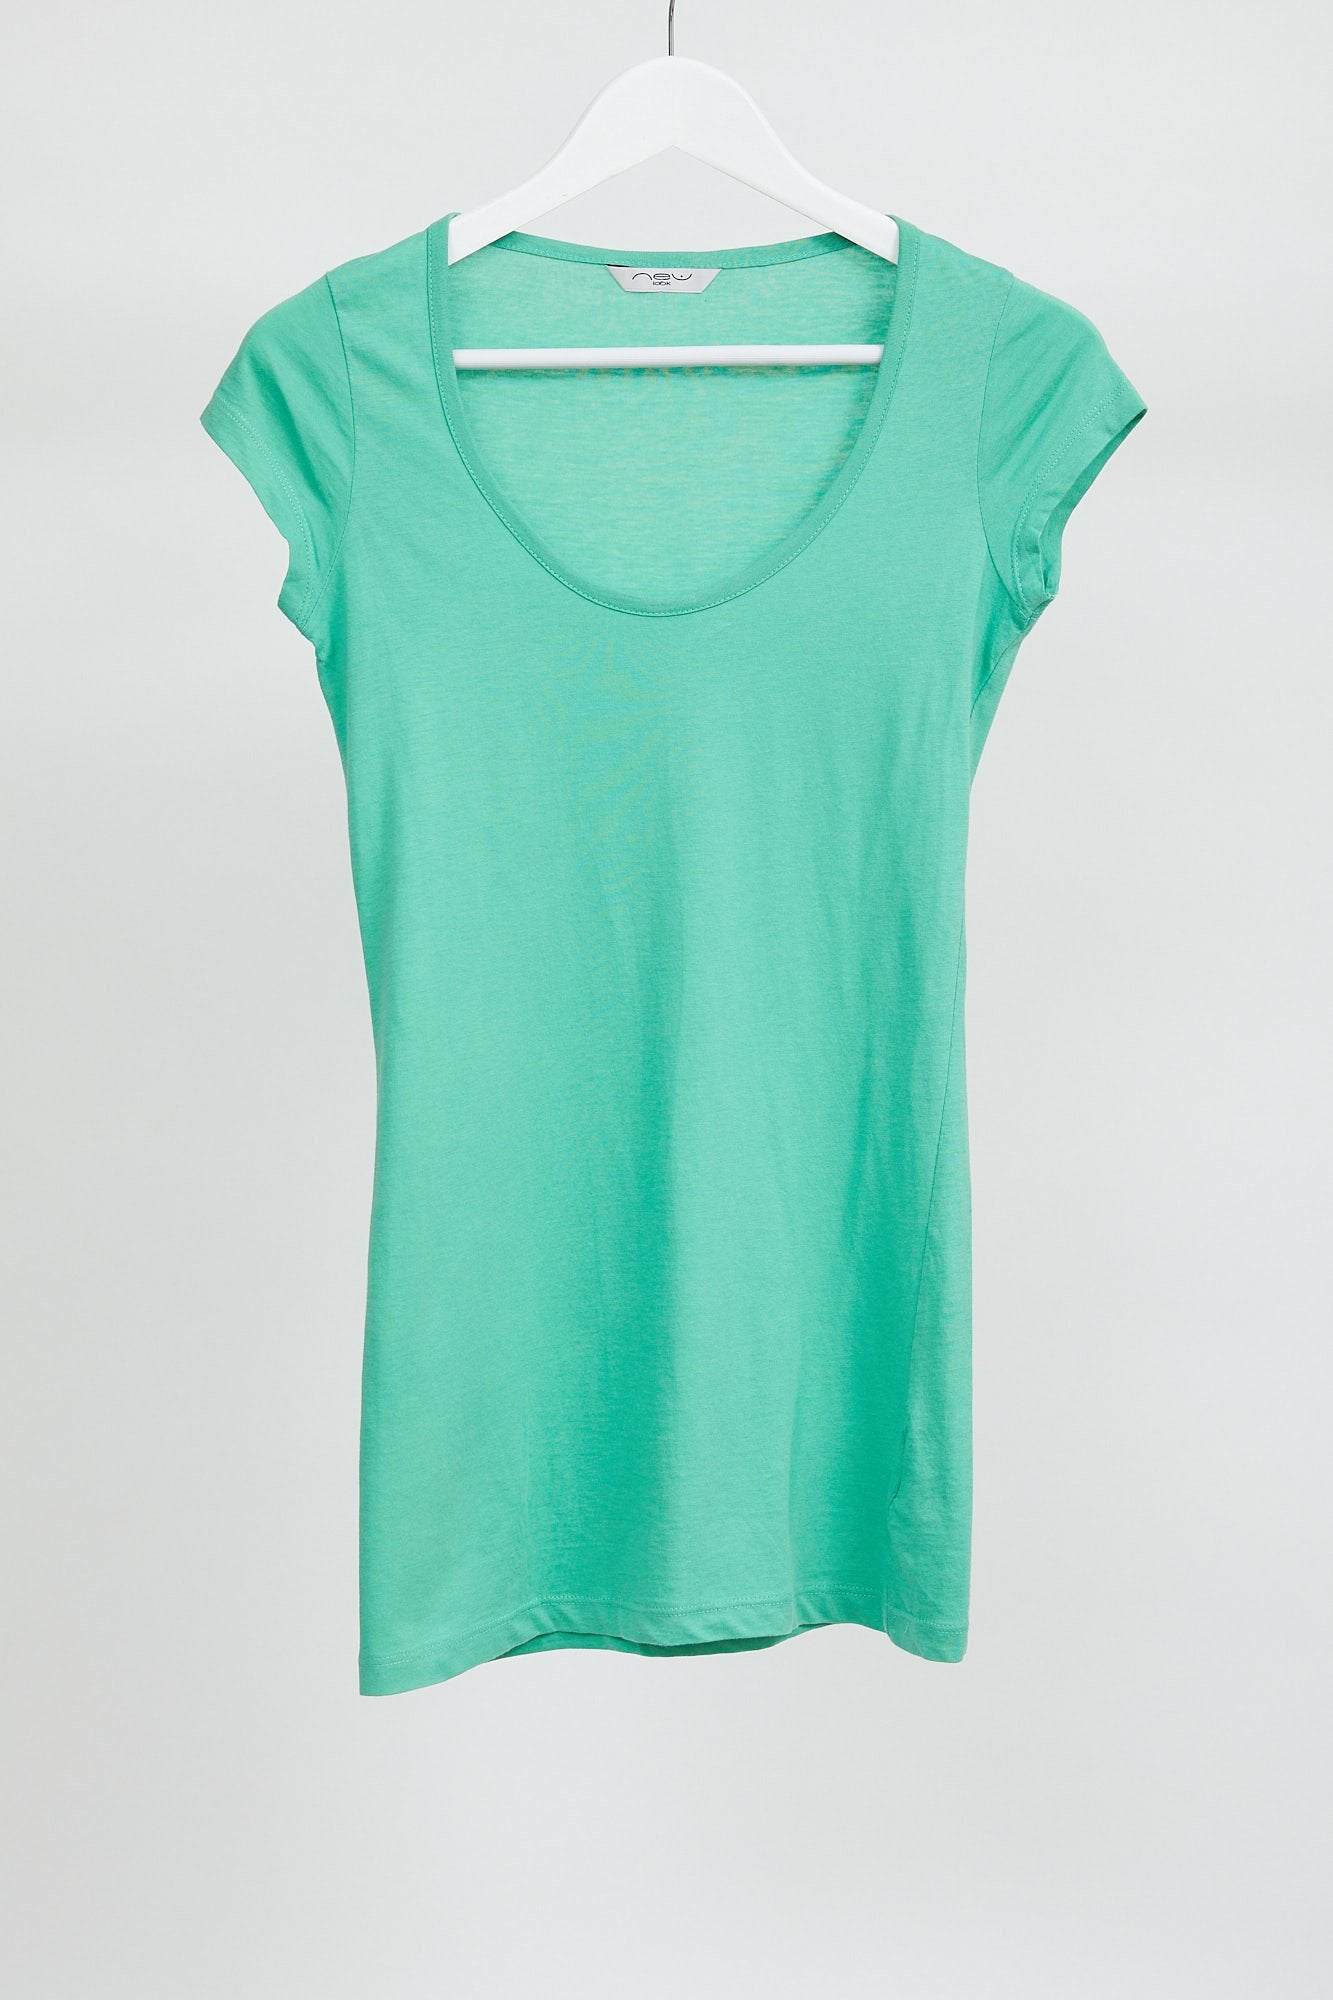 Womens Green Short Sleeve Top: Size Small